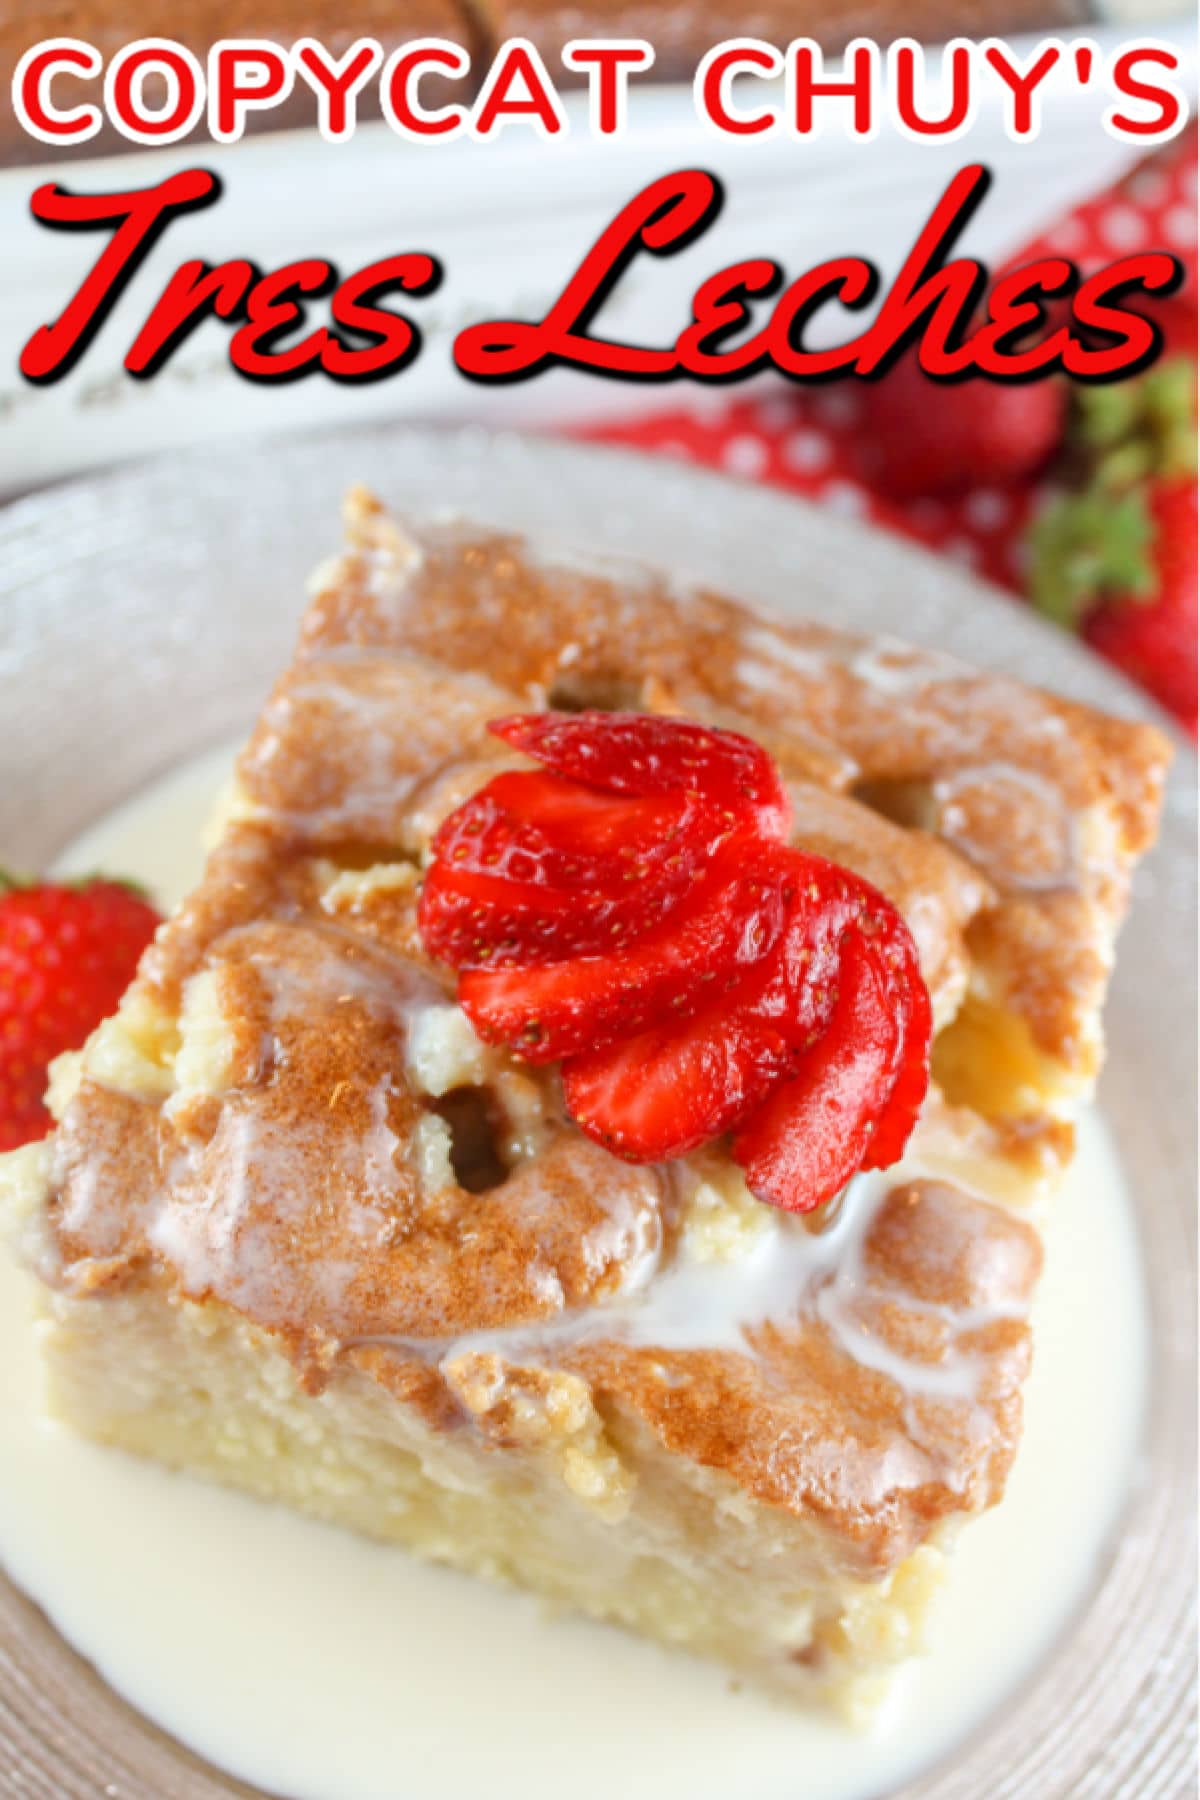 Chuy's Tres Leches Cake is by far and away my absolute favorite restaurant dessert. Usually around my birthday - I treat myself and just get a piece of it to-go. NO MORE!!! Cuz I learned how to make it at home! This Copycat Chuy's Tres Leches Cake will now be your favorite too!  via @foodhussy